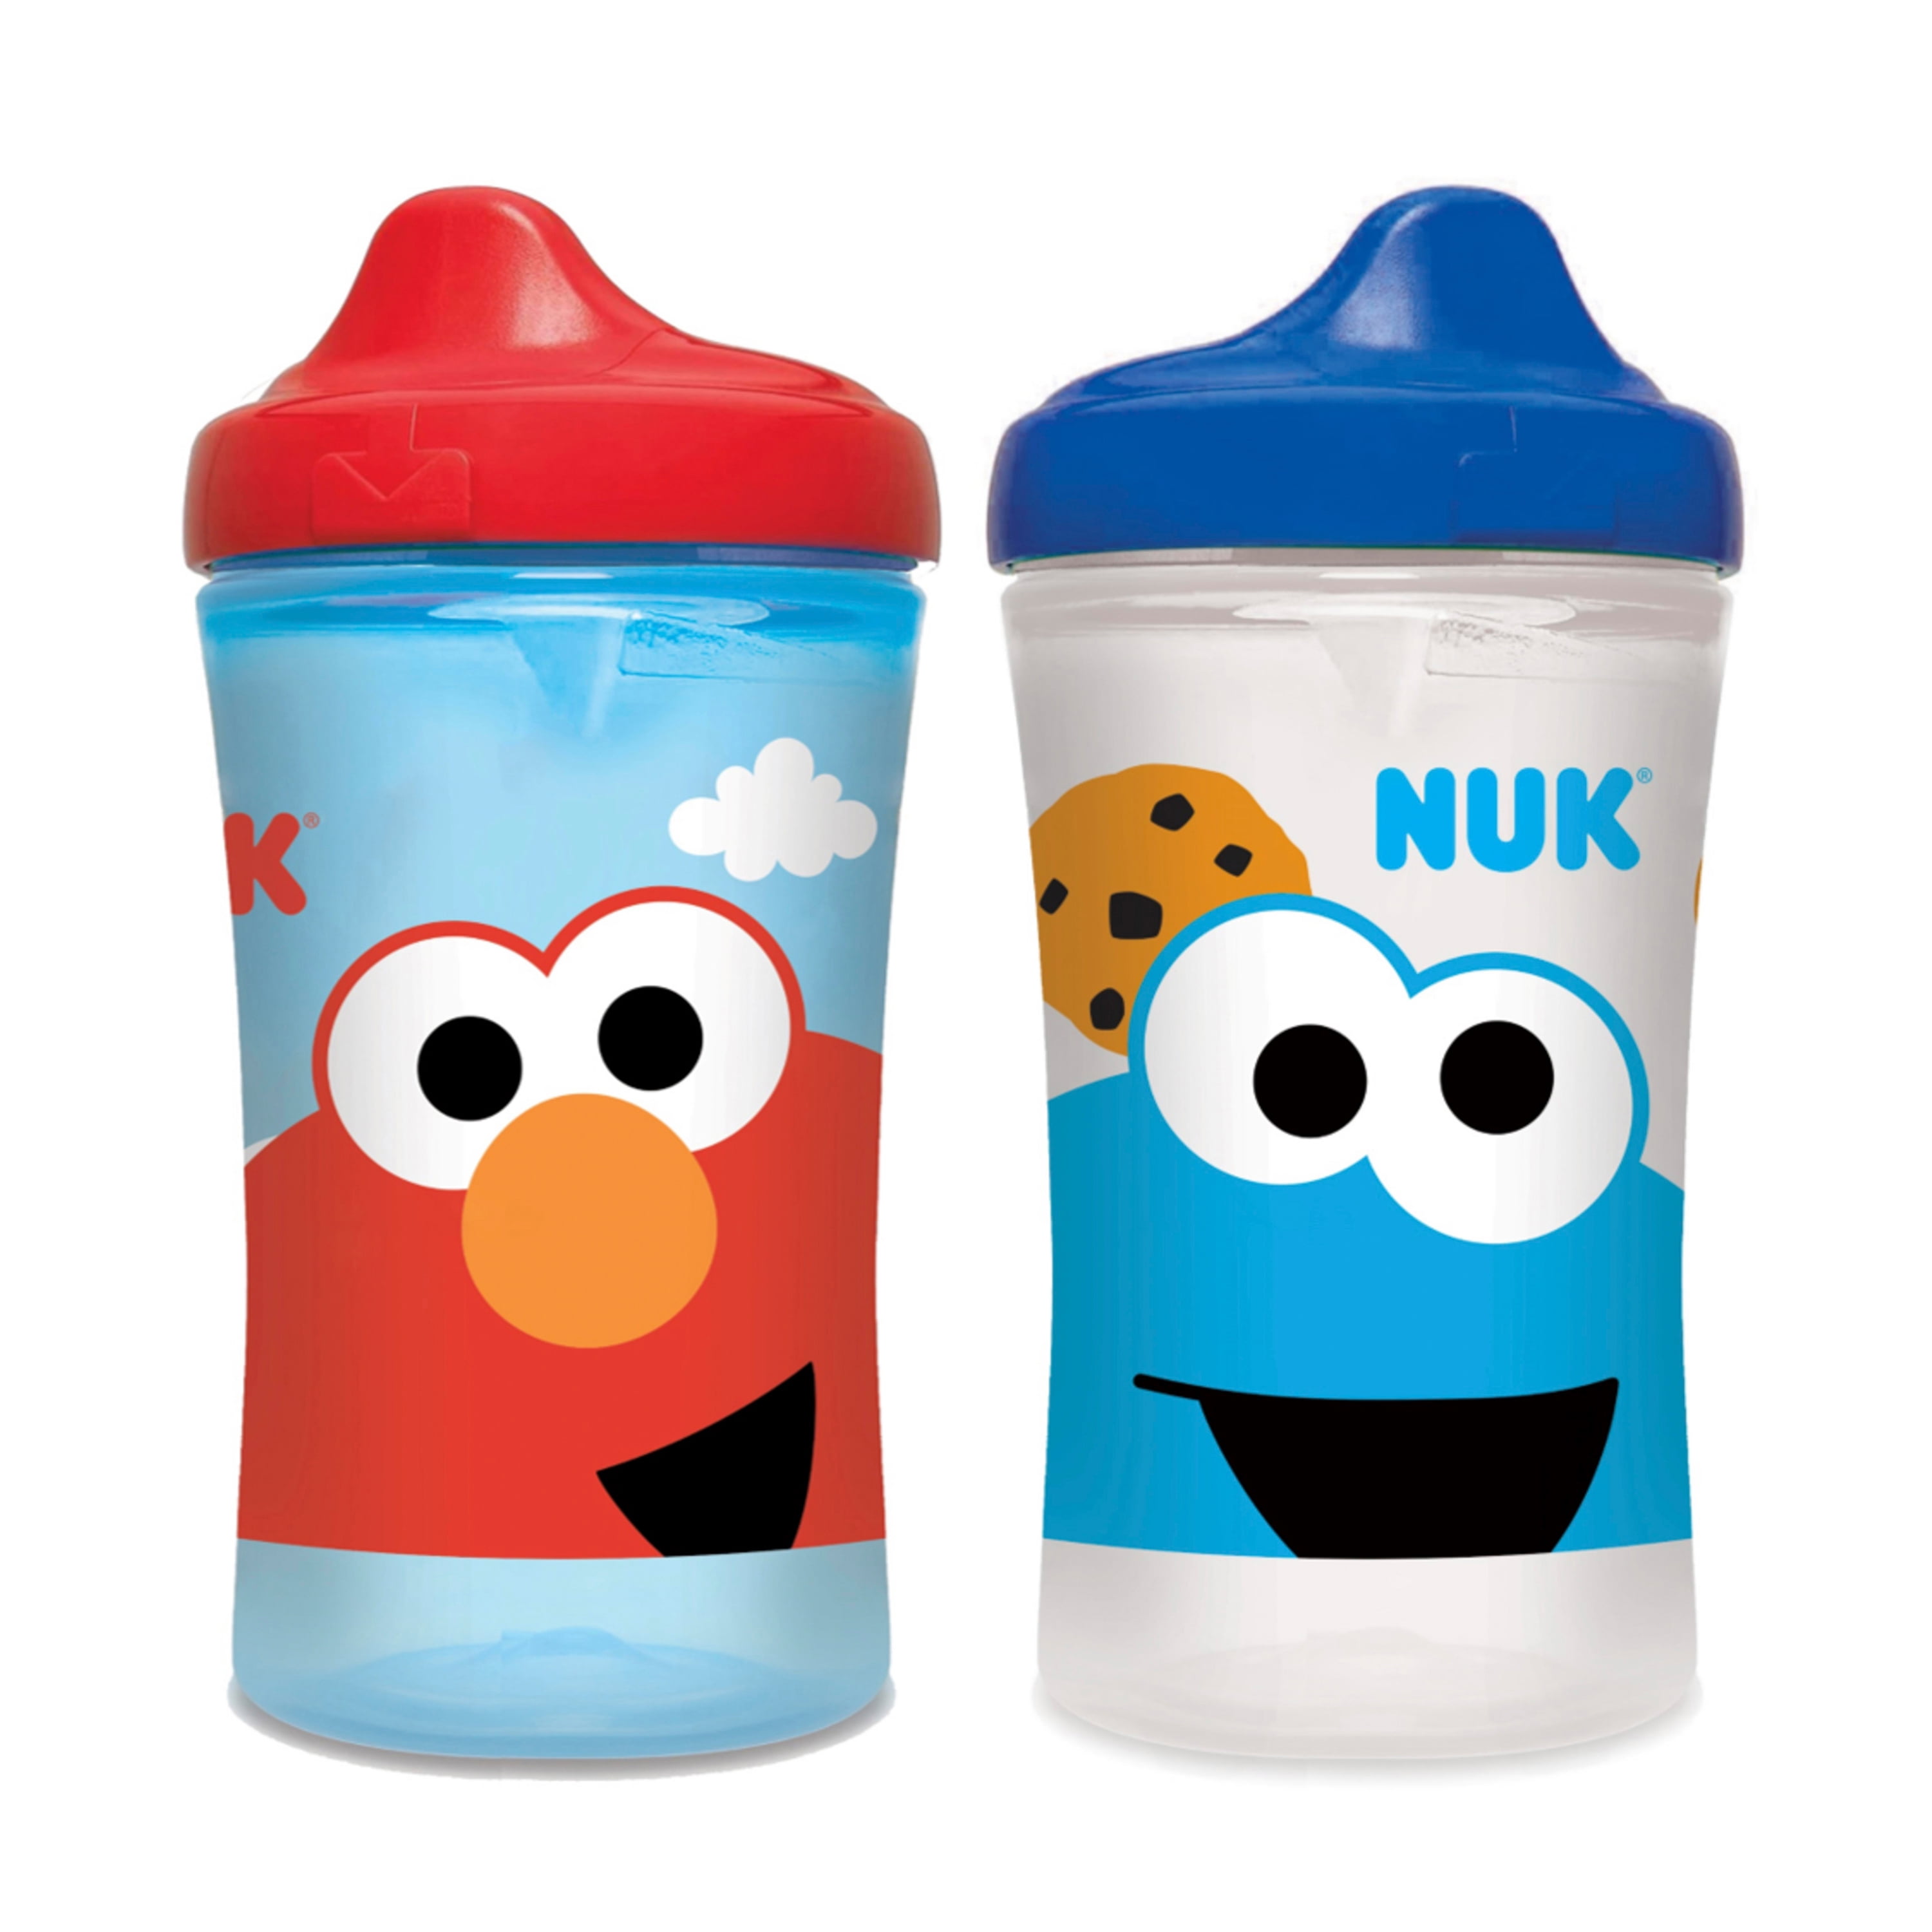 NUK Gerber Graduates Boy 2 Cups Colors and Styles May Vary 12+ Months 10 oz 